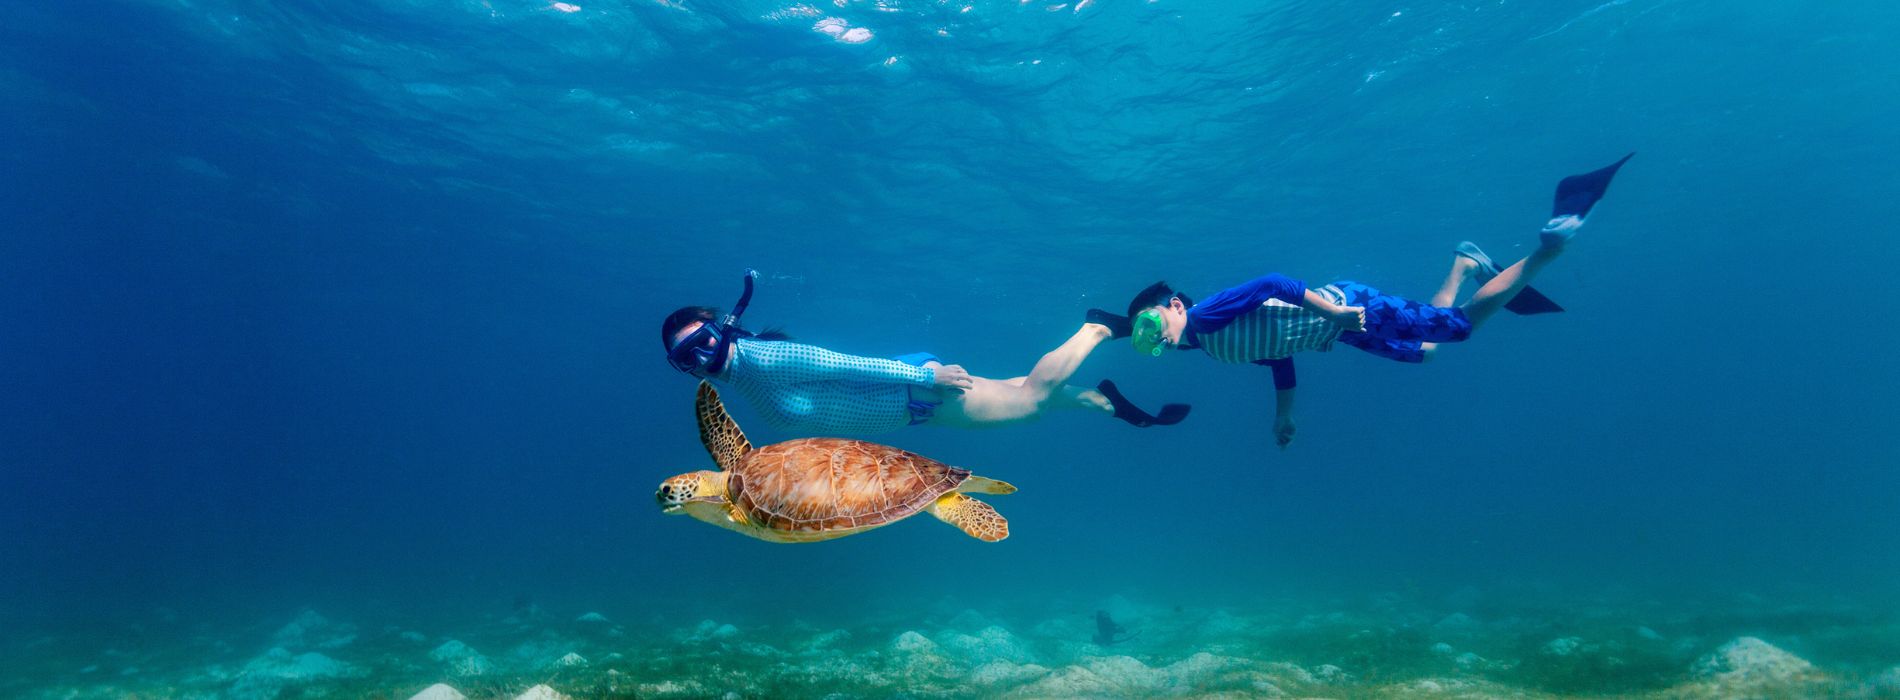 Snorkel with Sea Turtles in Florida - A Magical Underwater Experience - Madeinsea©